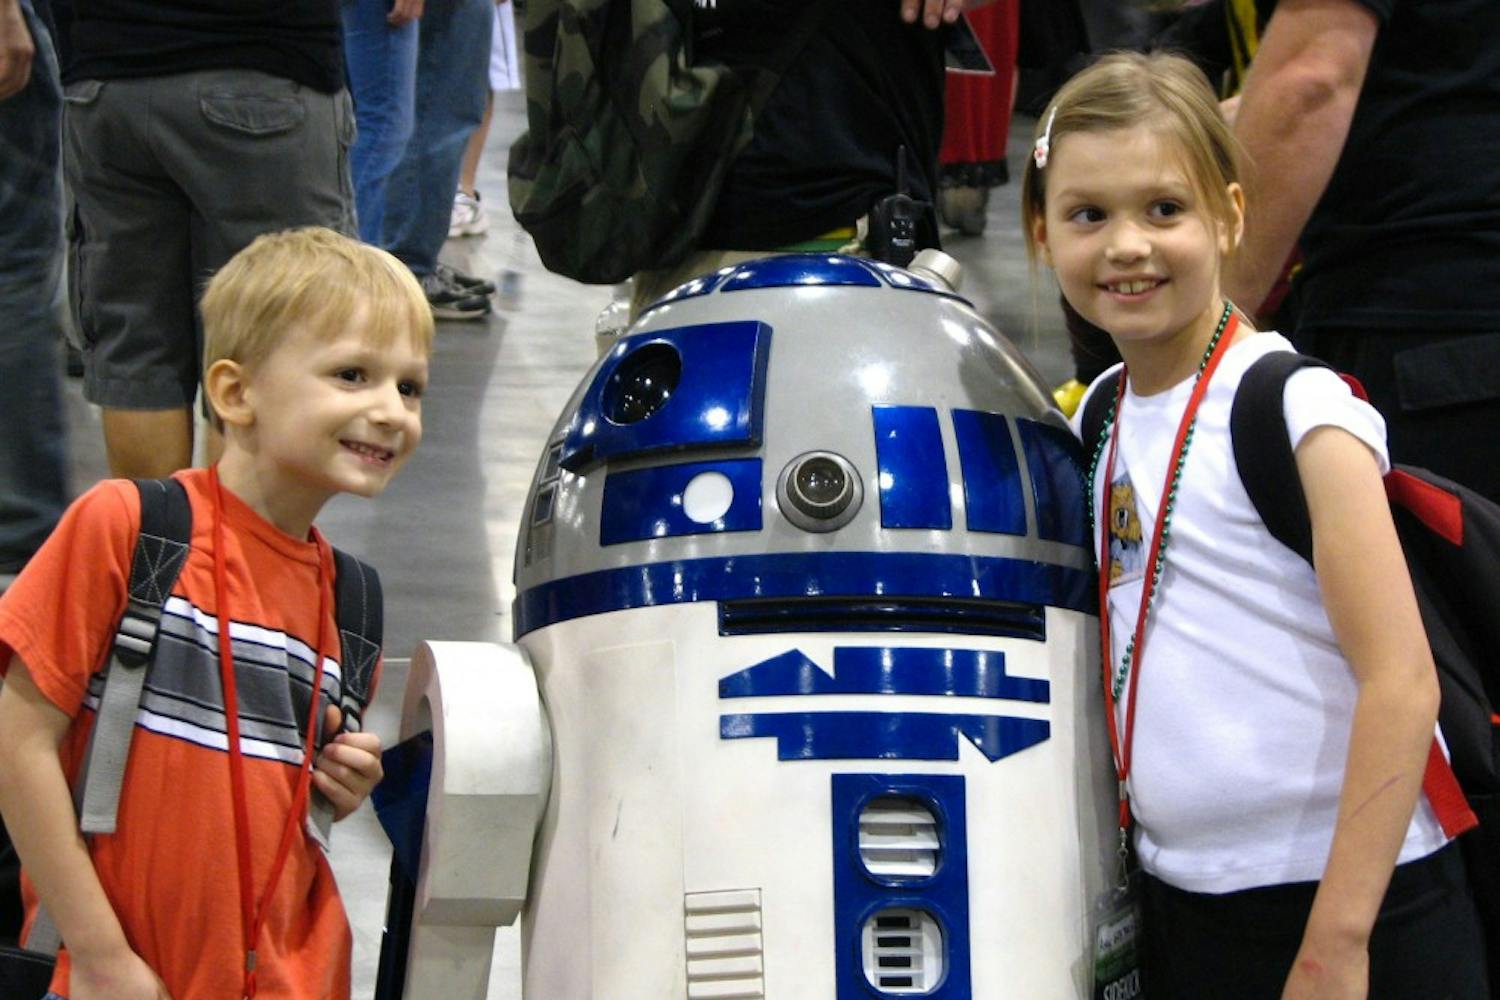 GEEK PARADISE: Children pose next to a replica of R2D2 at the Phoenix Comi-Con on Thursday night. Thousands of comic and sci-fi fans are expected to attend the annual convention this year that will include exhibits, appearances by film and television stars and hundreds of vendors. (Photo by Travis McKnight)